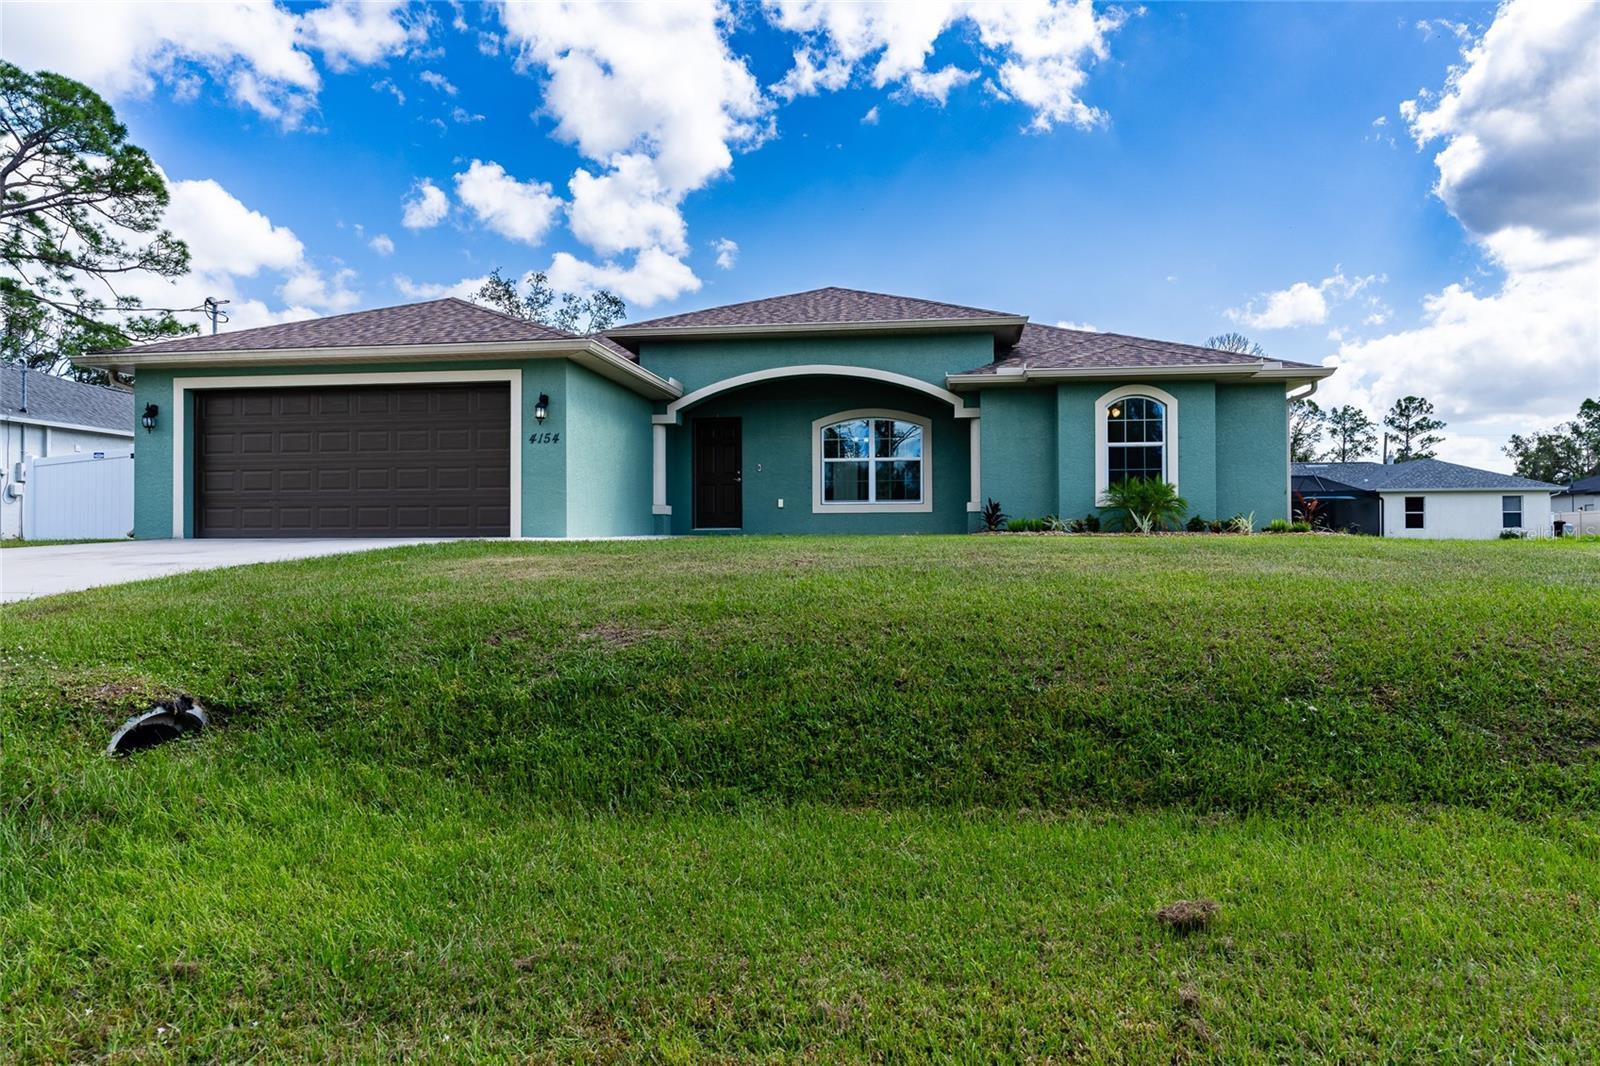 Photo one of 4154 Duluth Ter North Port FL 34286 | MLS G5075371